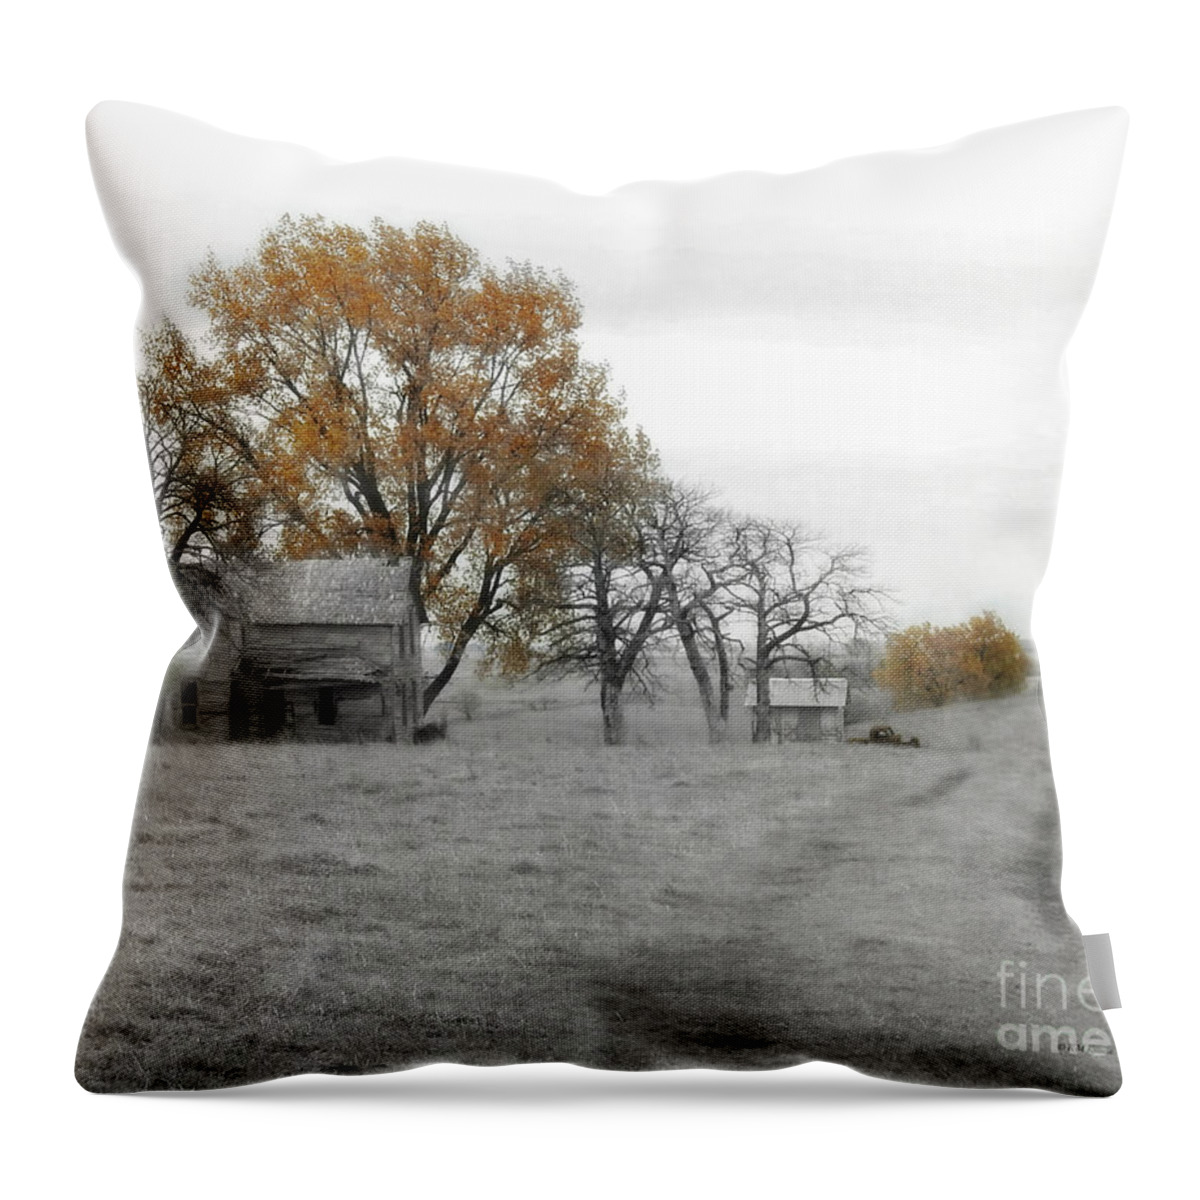 Splash Of Fall Color Throw Pillow featuring the photograph Splash Of Fall Color by Kathy M Krause